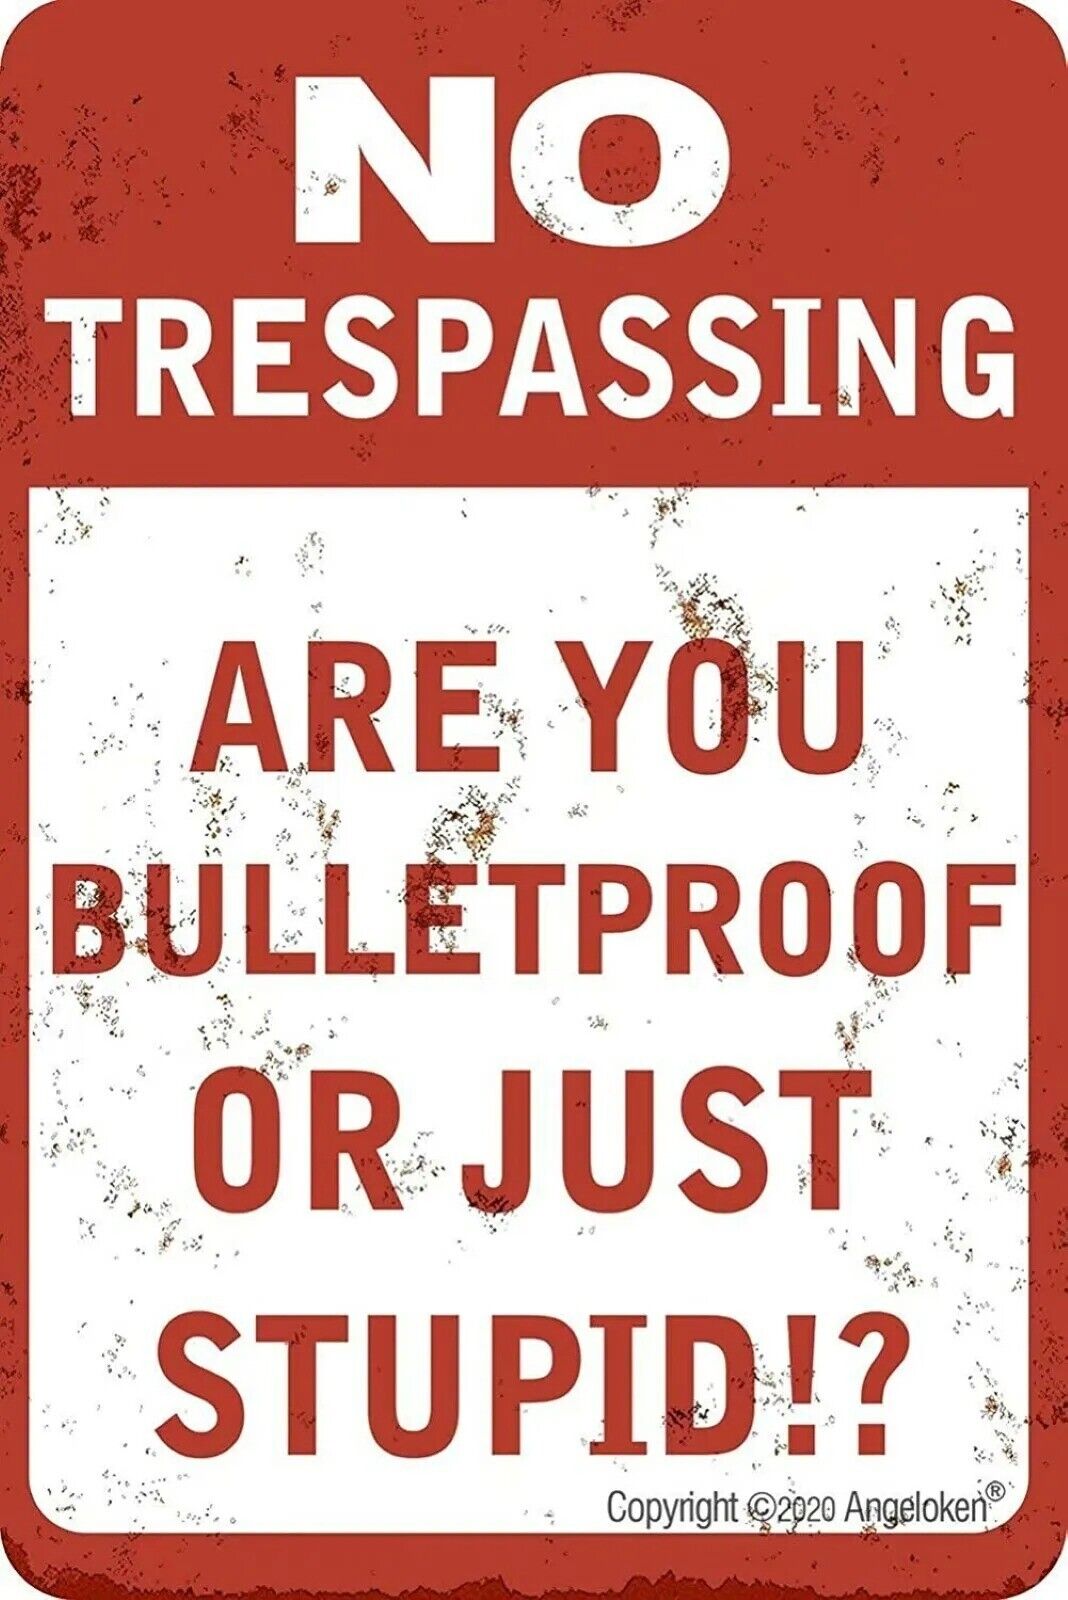 Metal Tin Sign Retro Vintage No Trespassing Are You Bulletproof or Just Stupid?